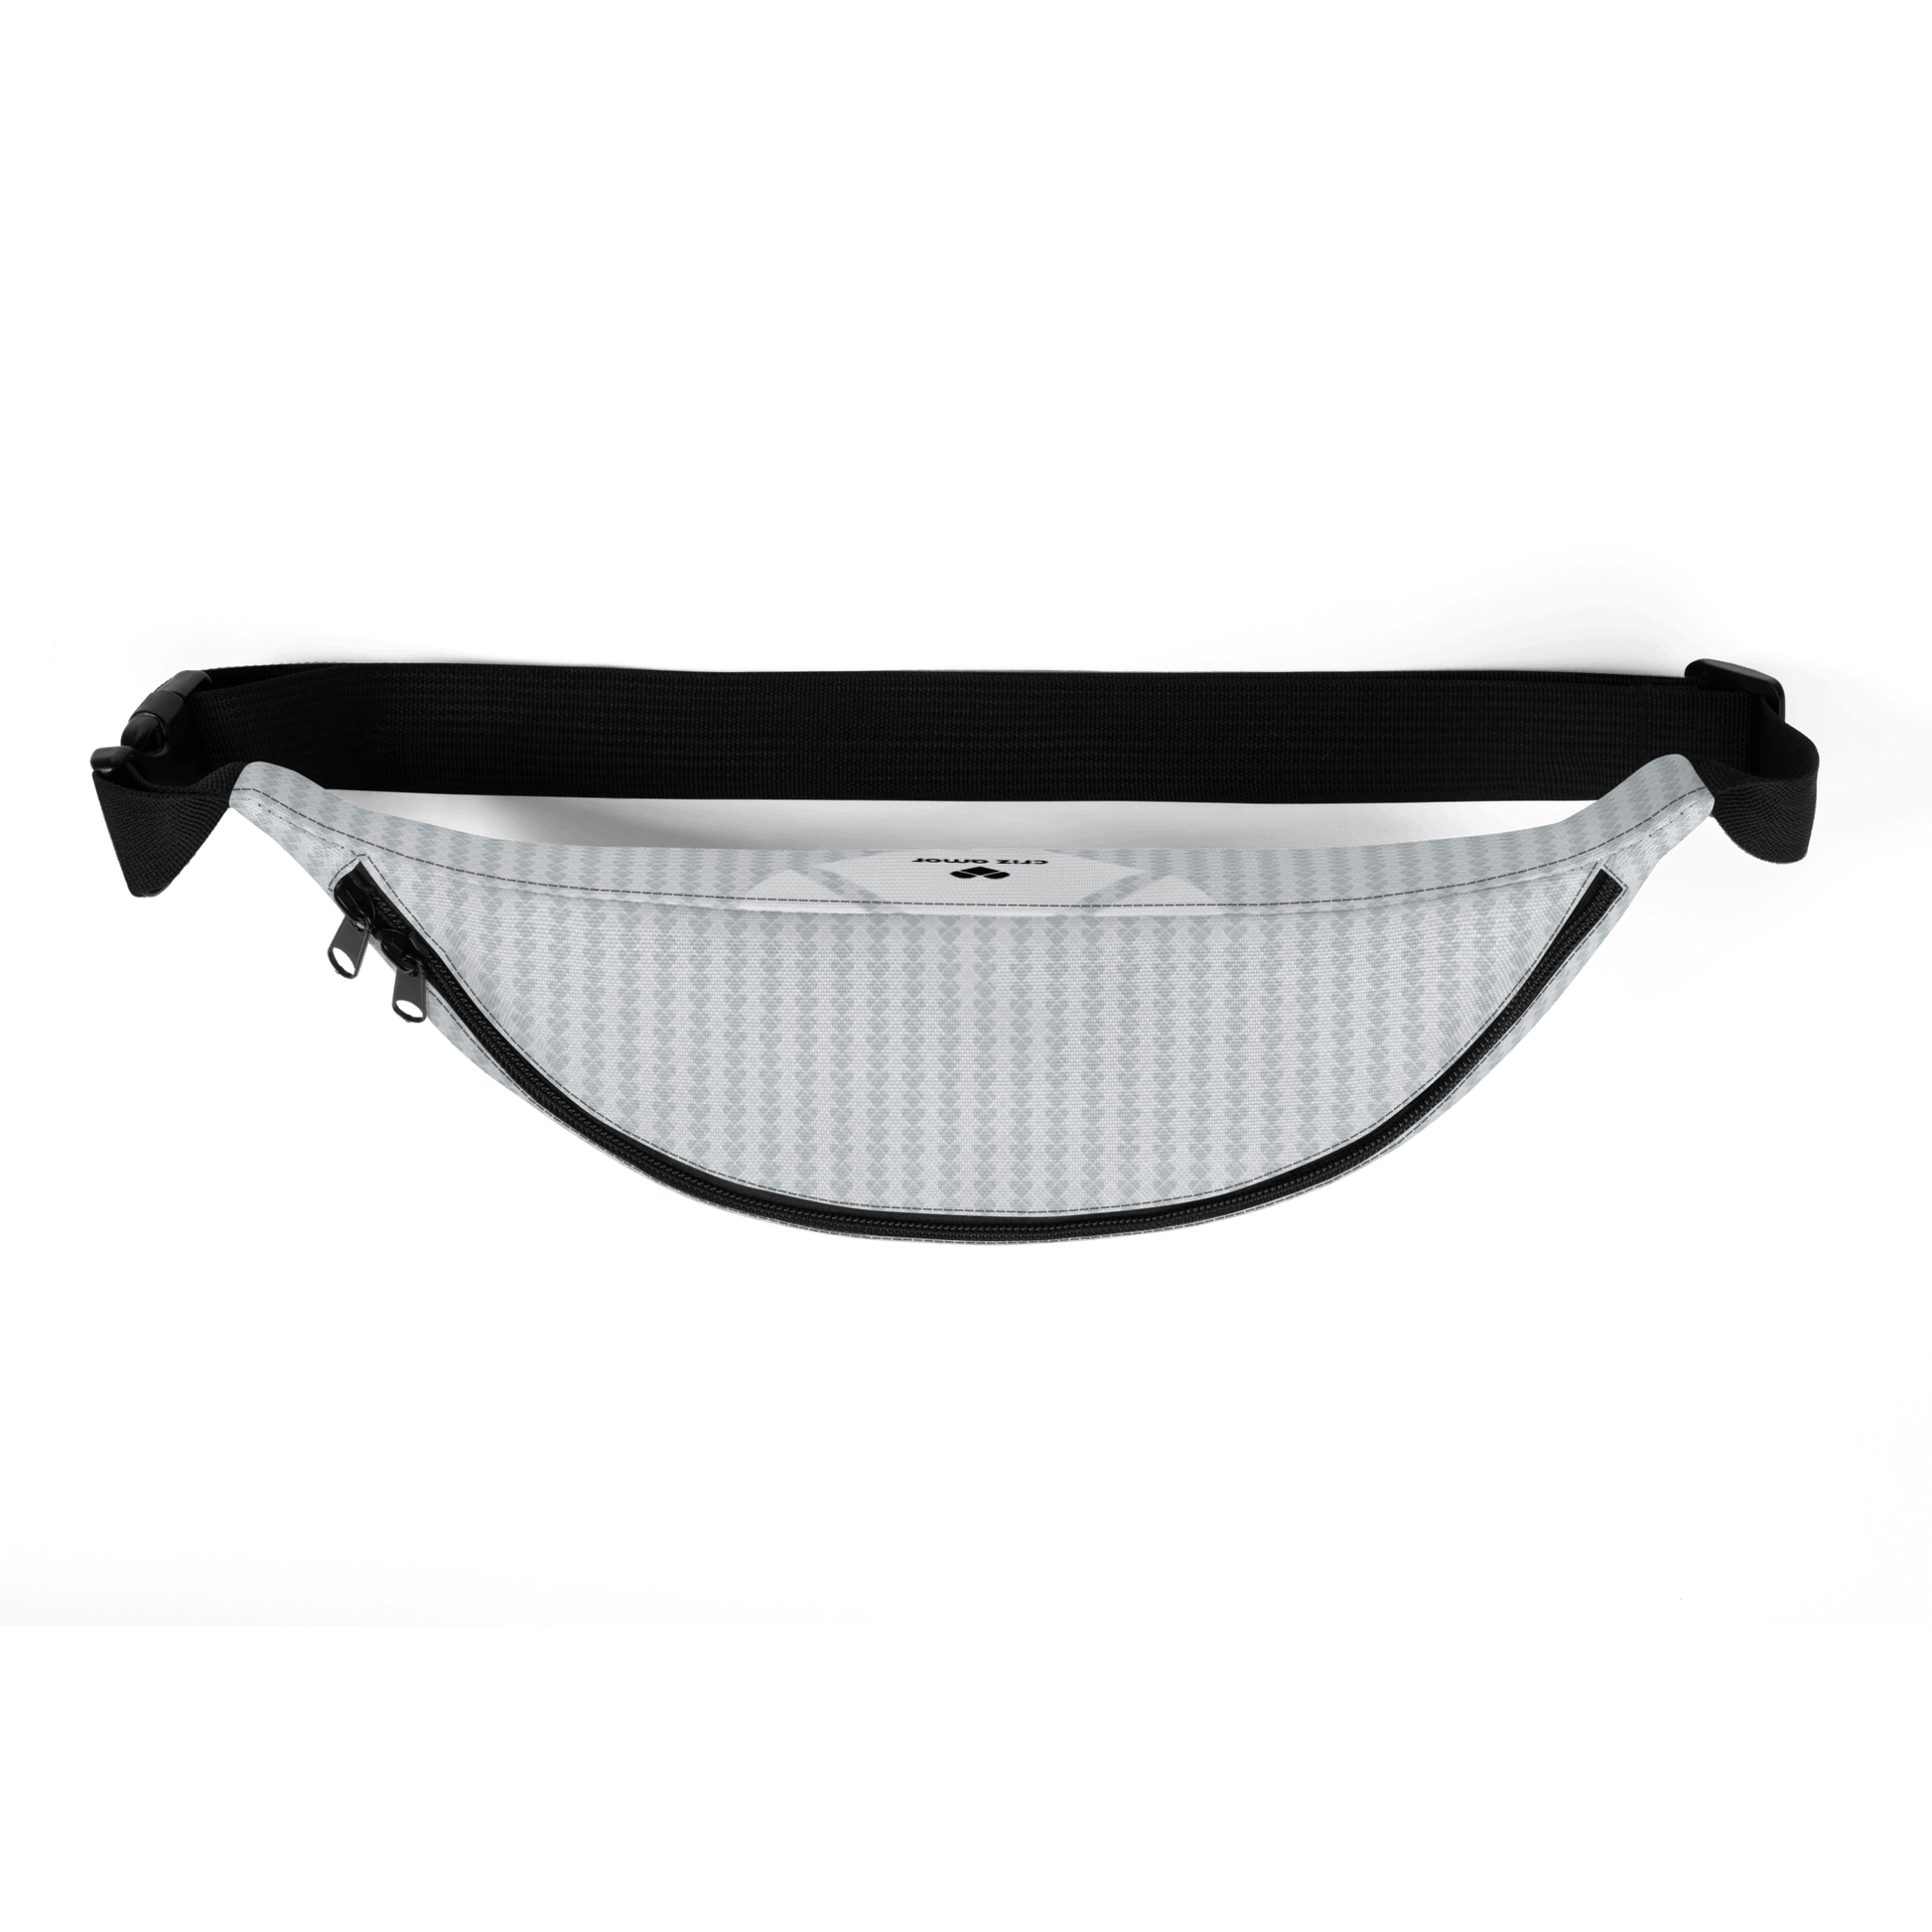 top view of a Genderless fanny pack with Lovogram heart logo design.